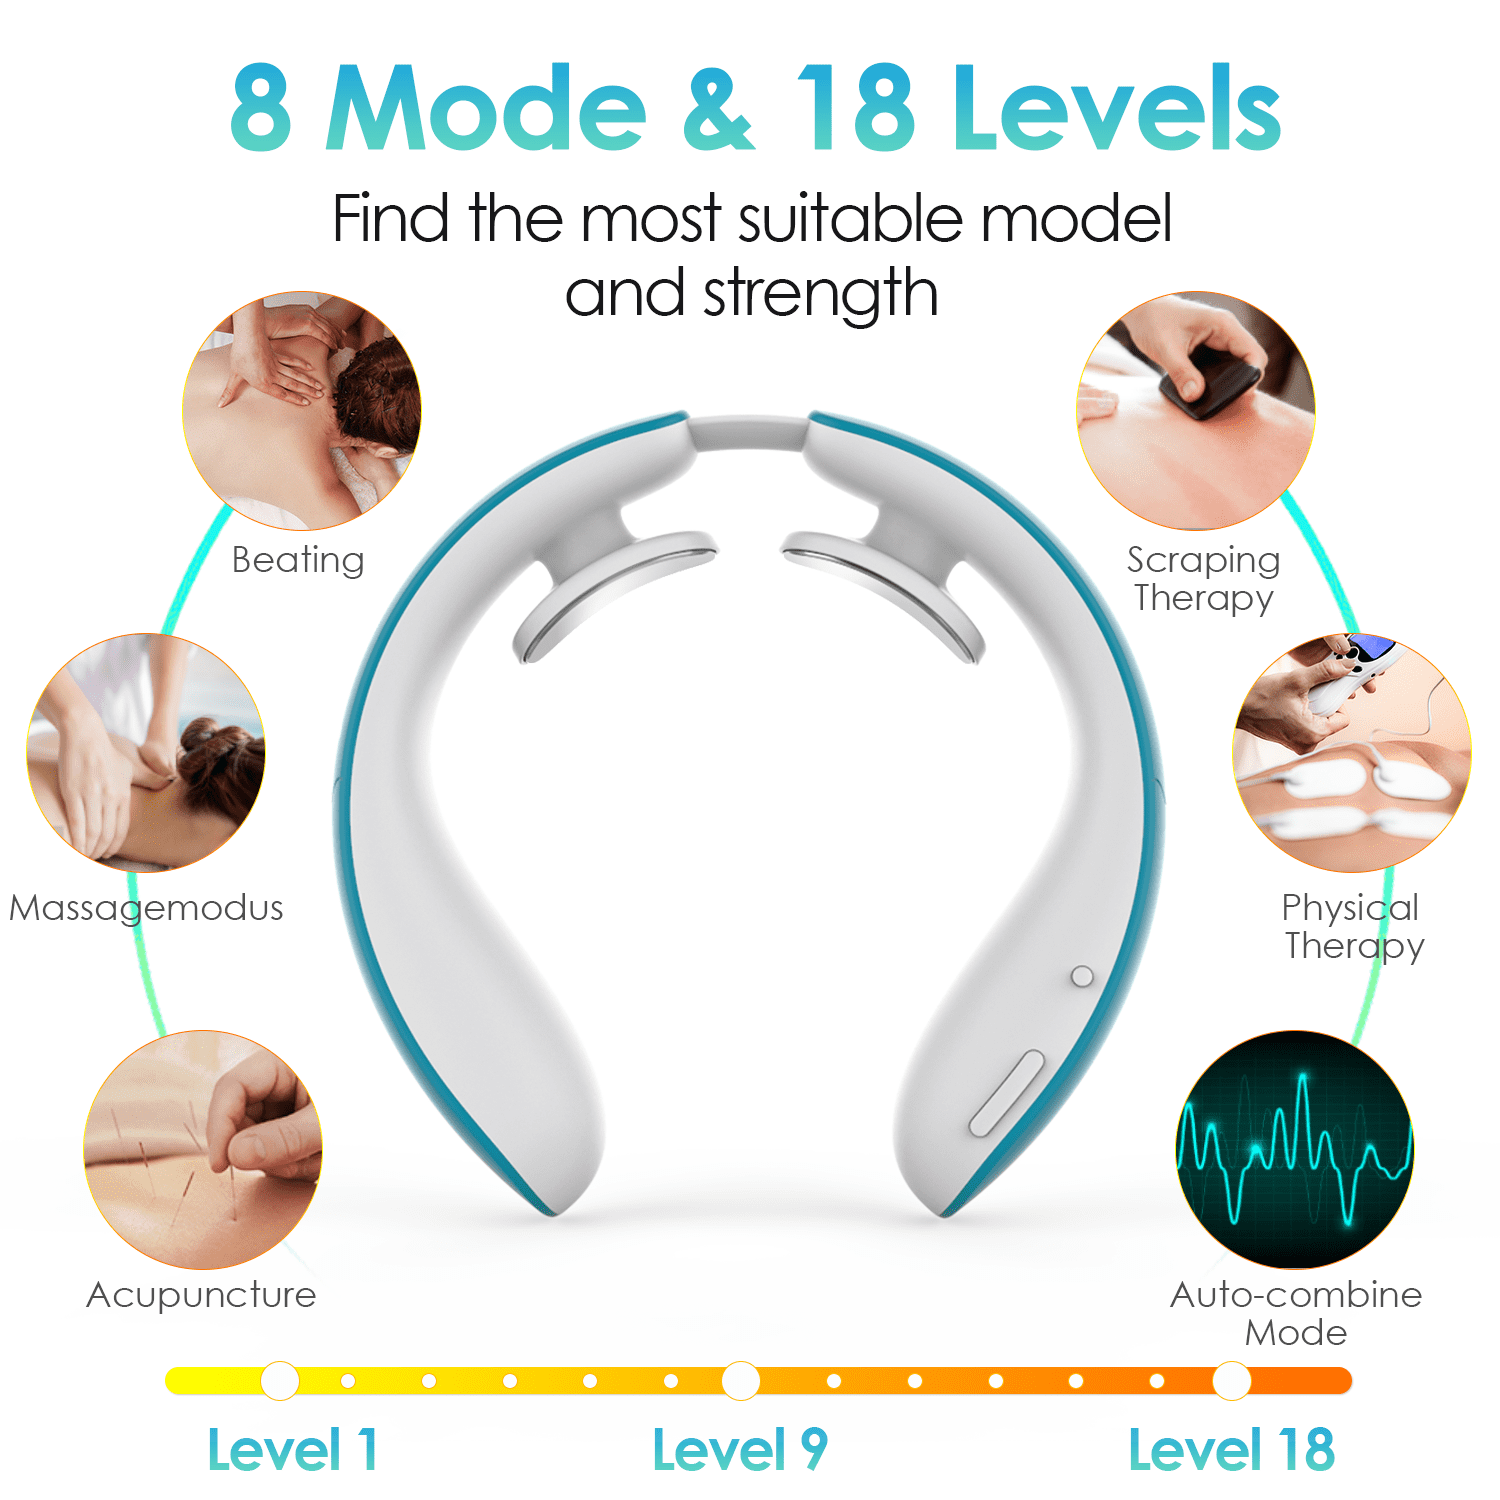 KaRQlife Intelligent Neck Massager, Wireless Electric Pulse Neck Massager-Portable  3D Travel Neck Massage Equipment with Heating + Vibration + Impulse  Function, Use at Home, Car, Office and Travel 